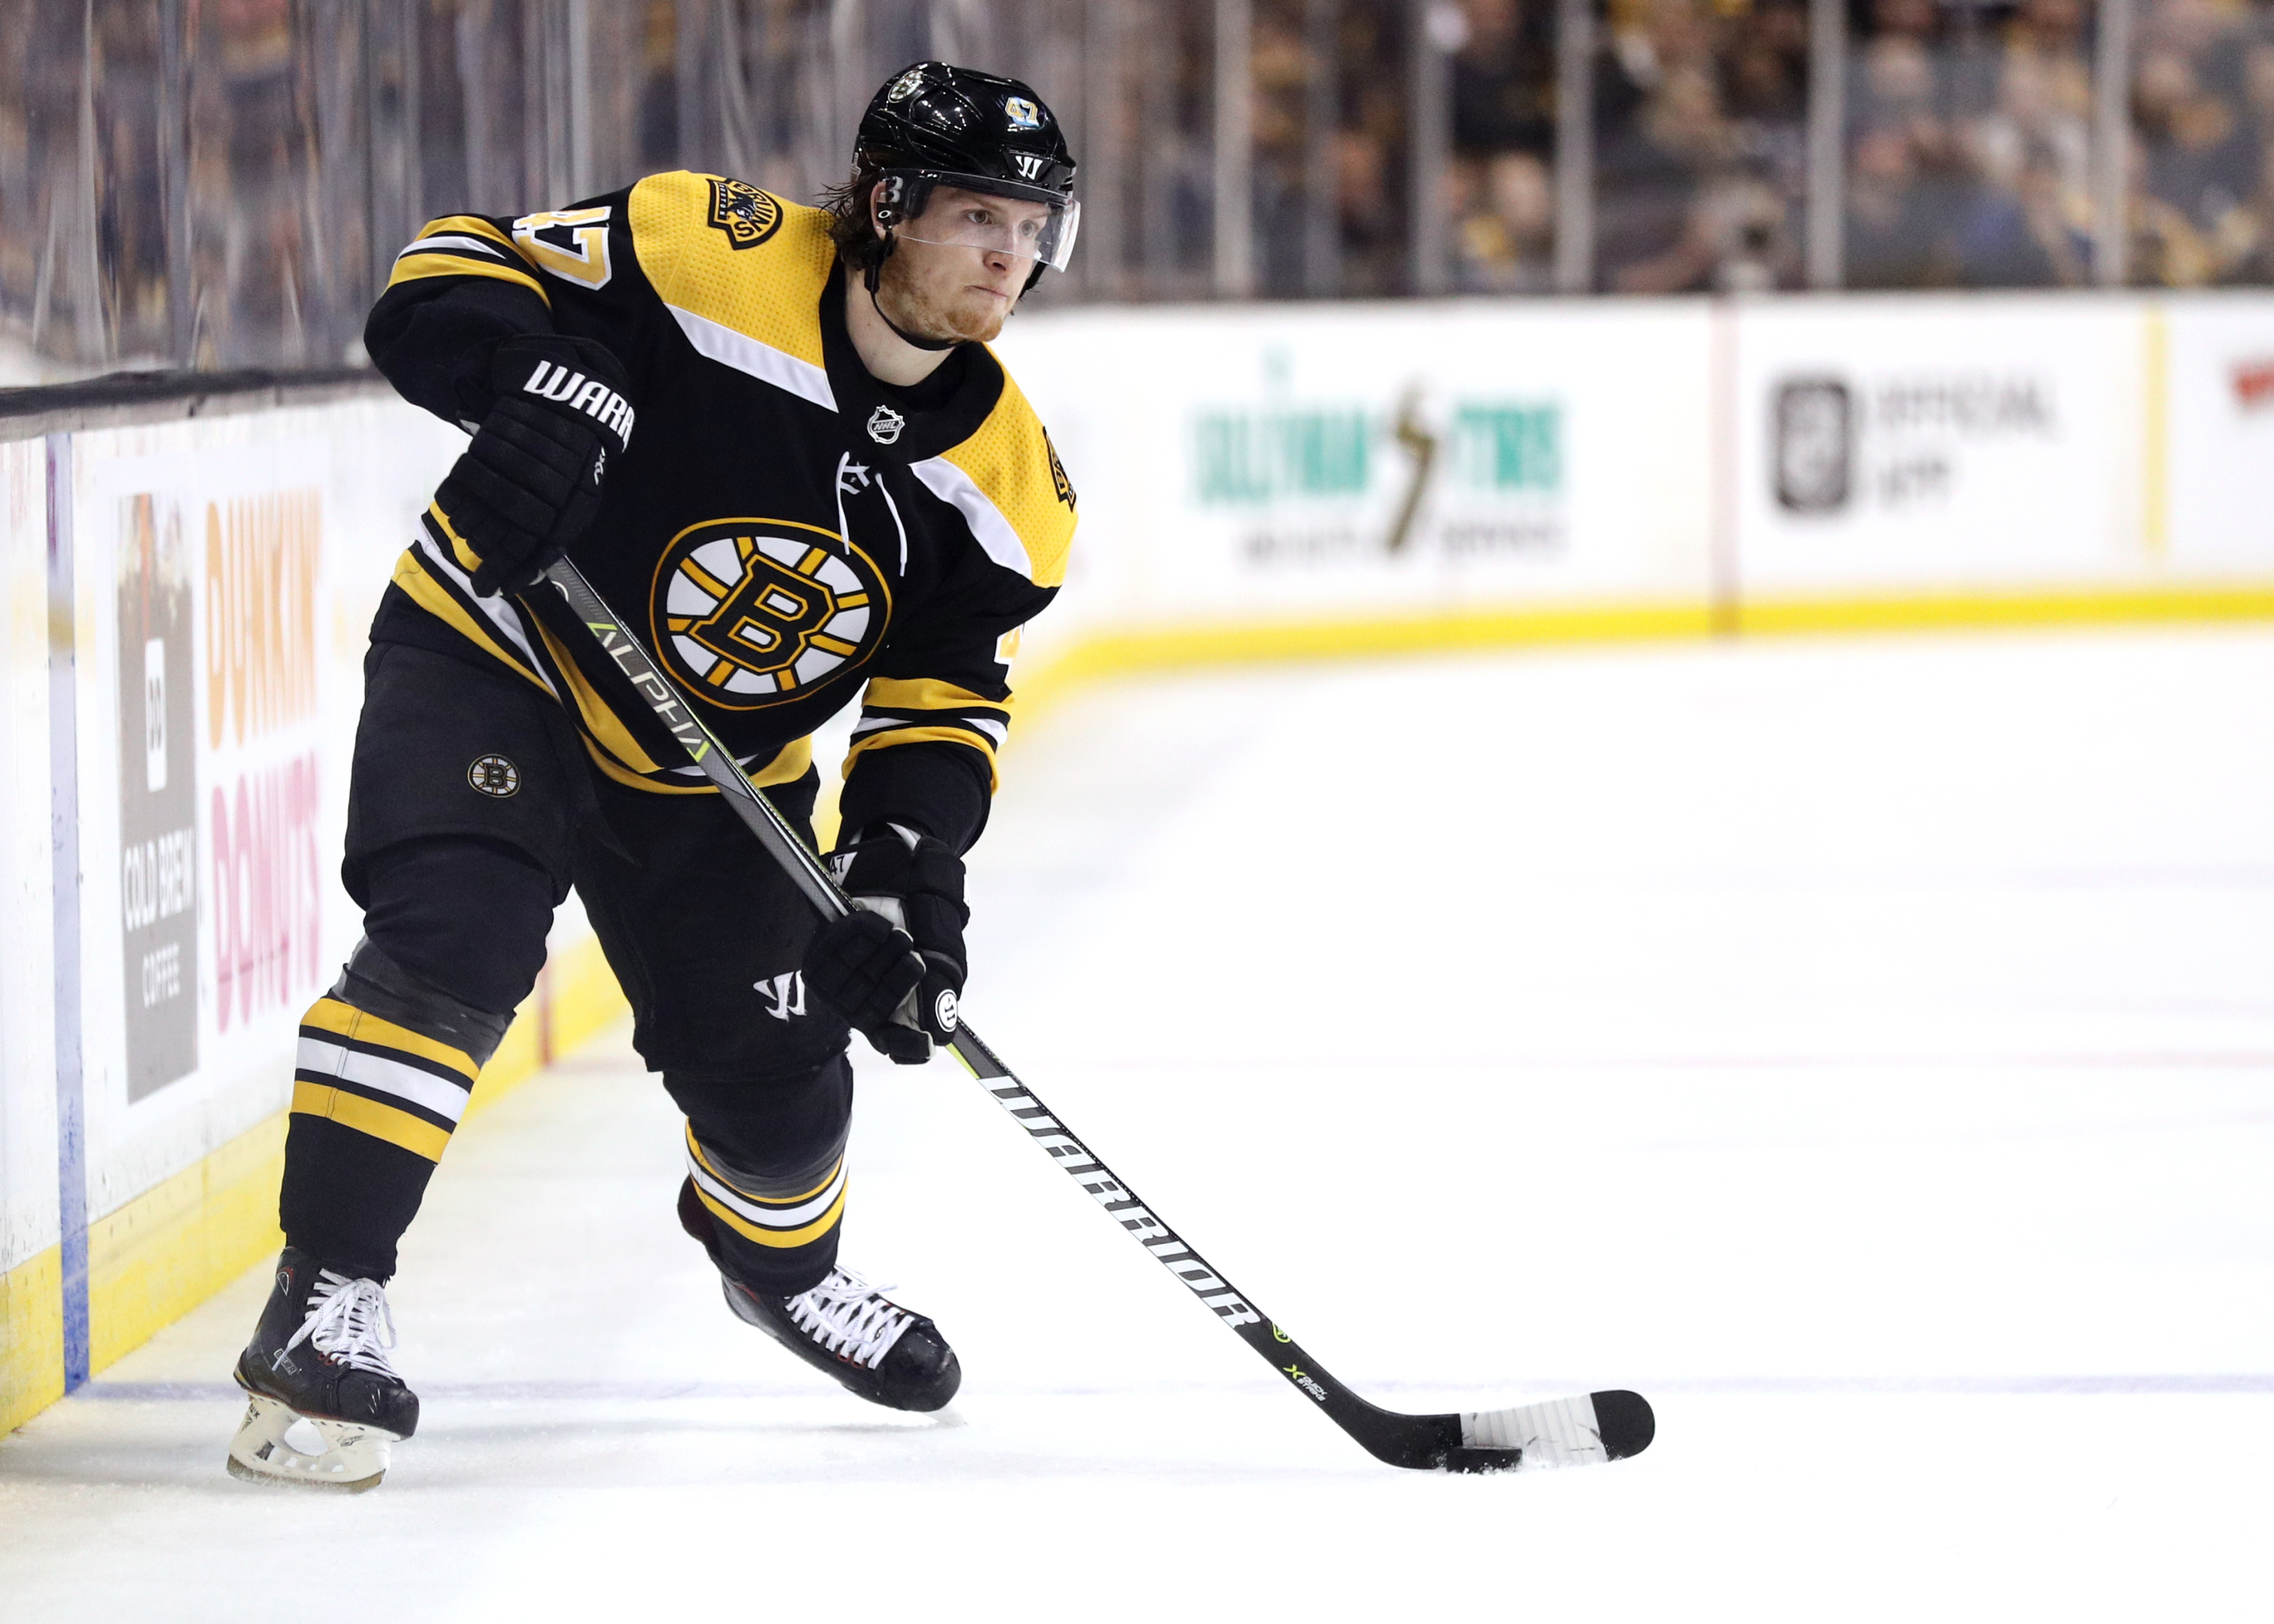 Bruins were glad to see old friend Torey Krug back in town with